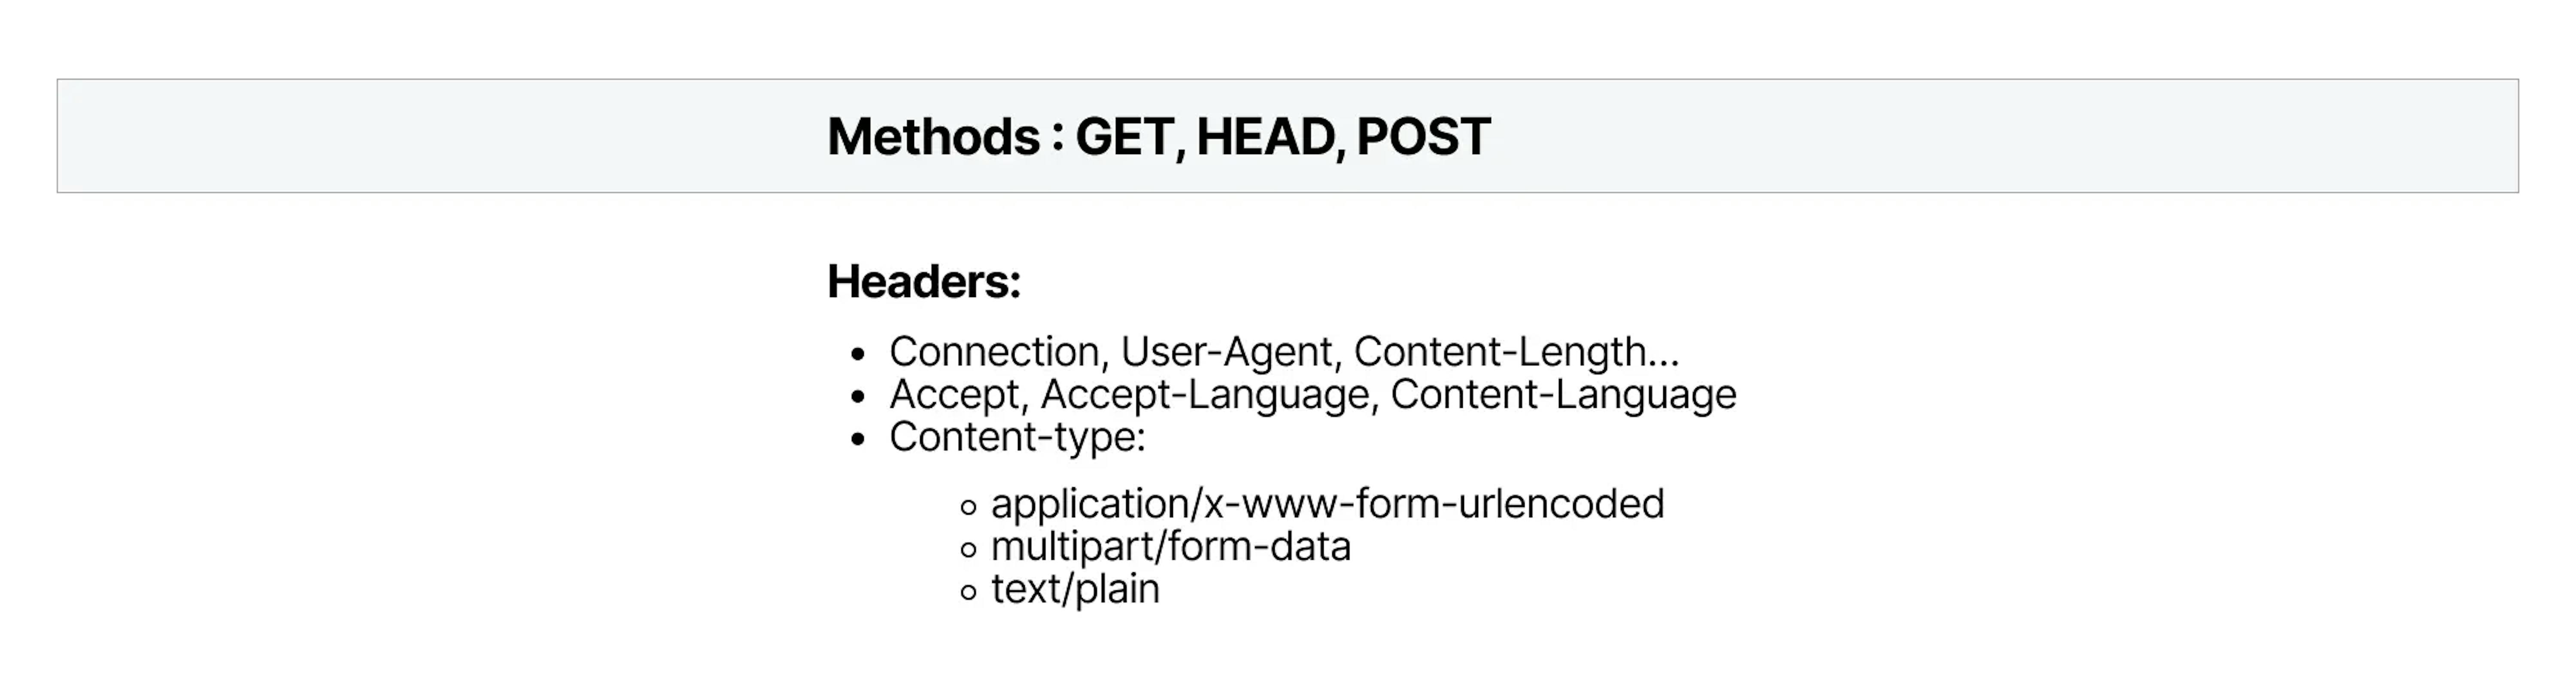 CORS list of safe methods and headers